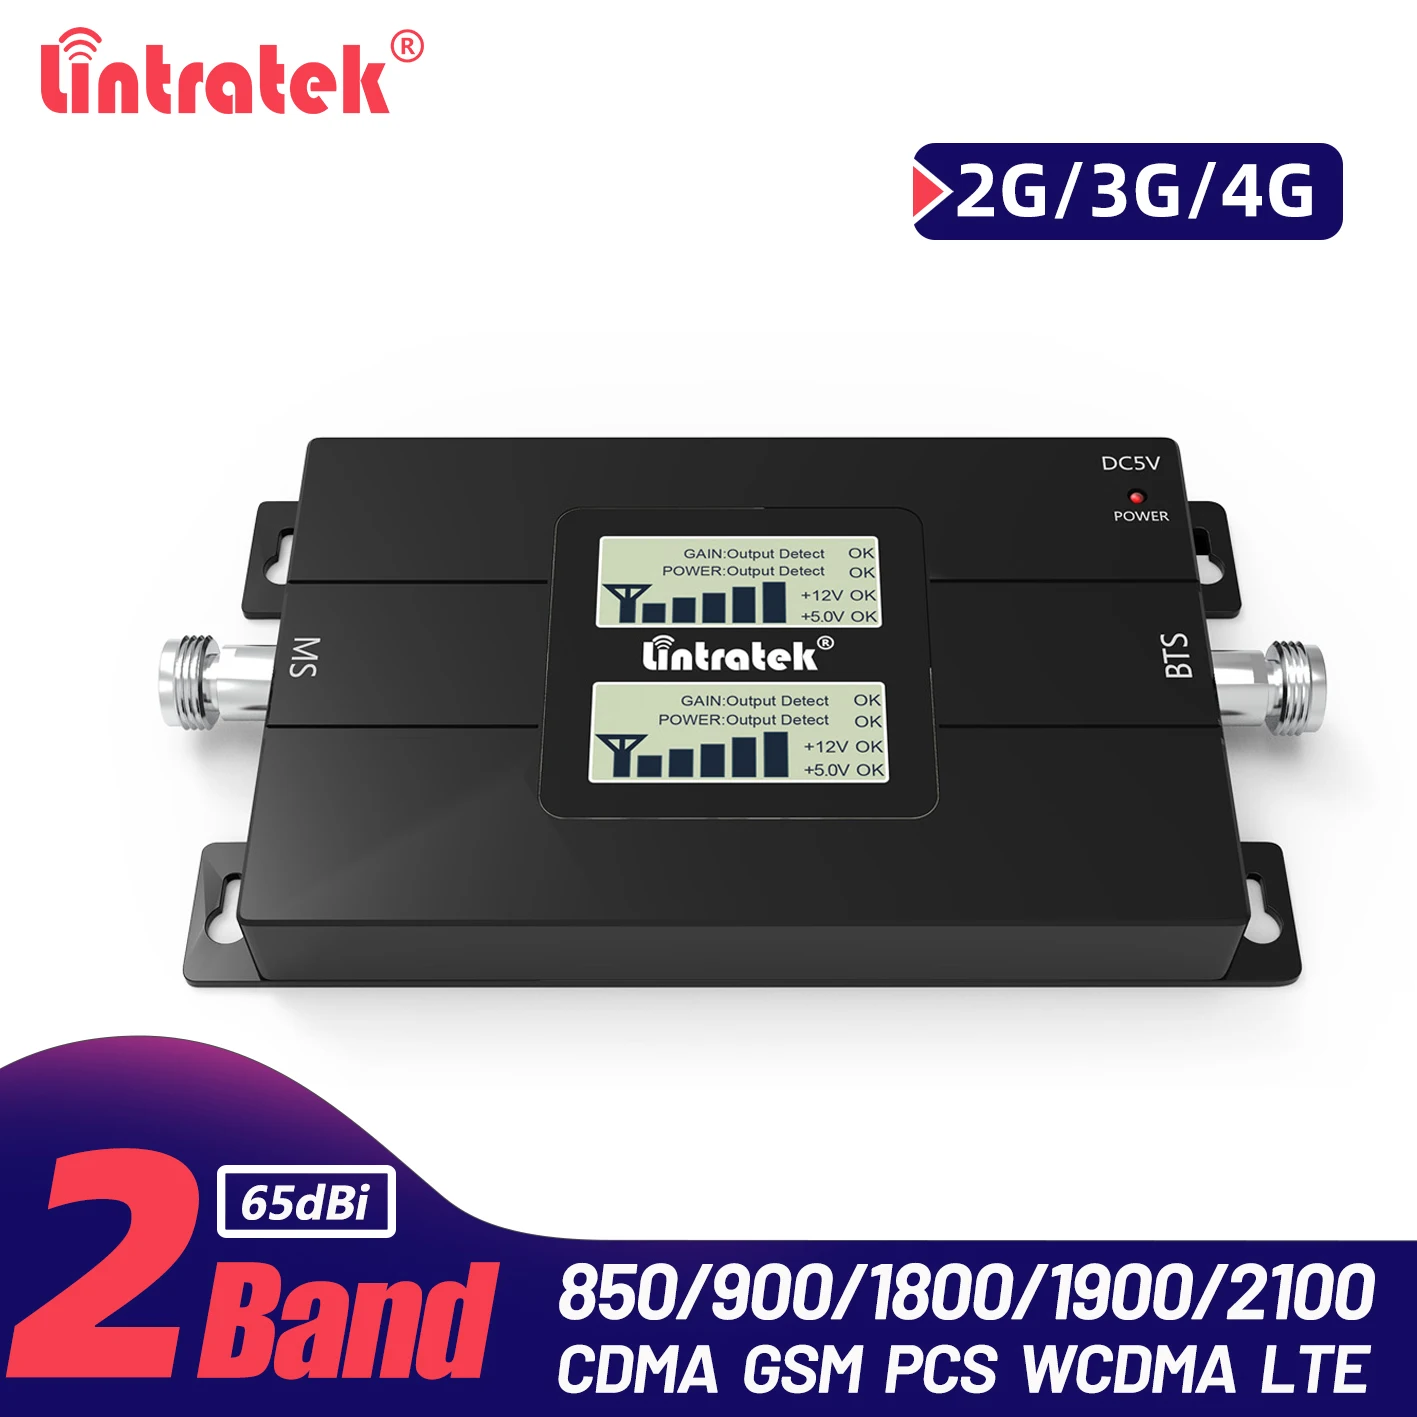 Lintratek 2G 4G Dual Band Signal Booster CDMA 850 PCS 1900 GSM WCDMA 1800 2100 Mobile Phone Repeater Band 2 Cellular Amplifier